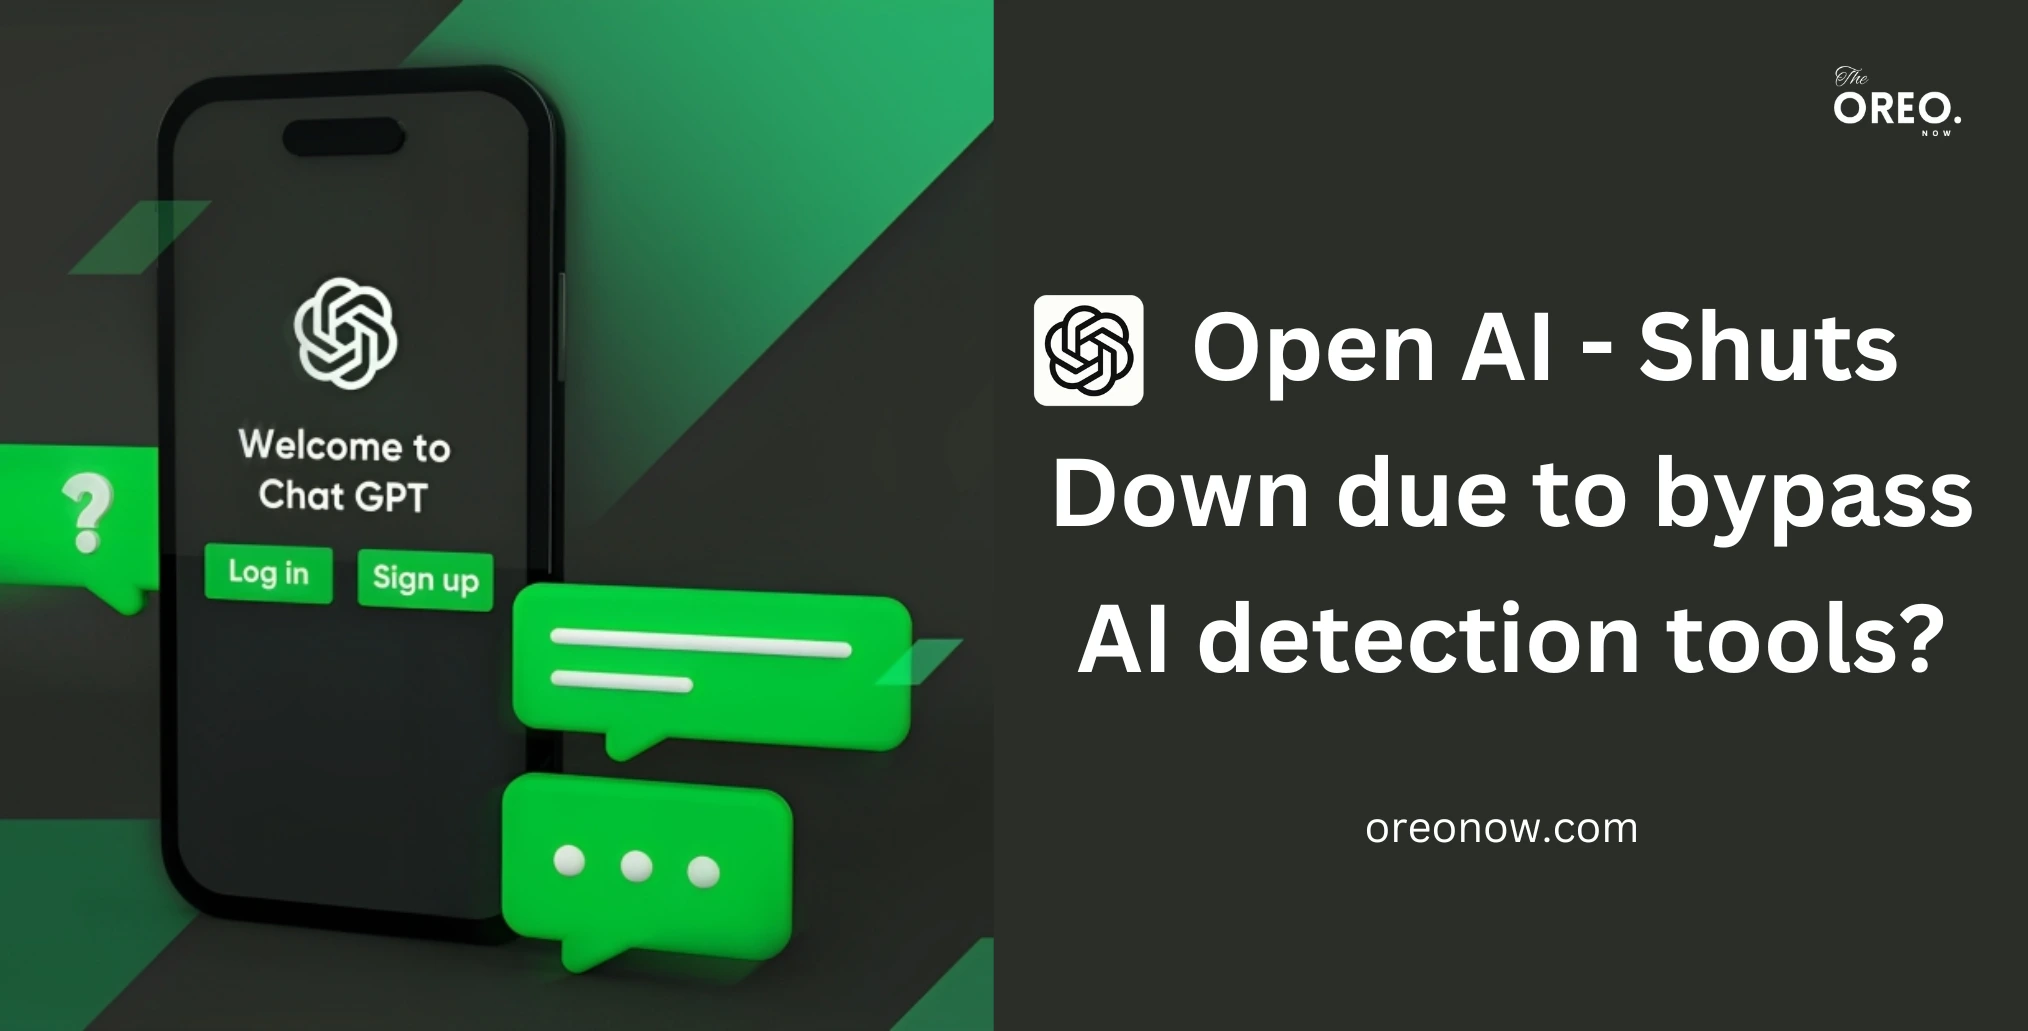 Open AI - Shuts Down due to bypass AI detection tools